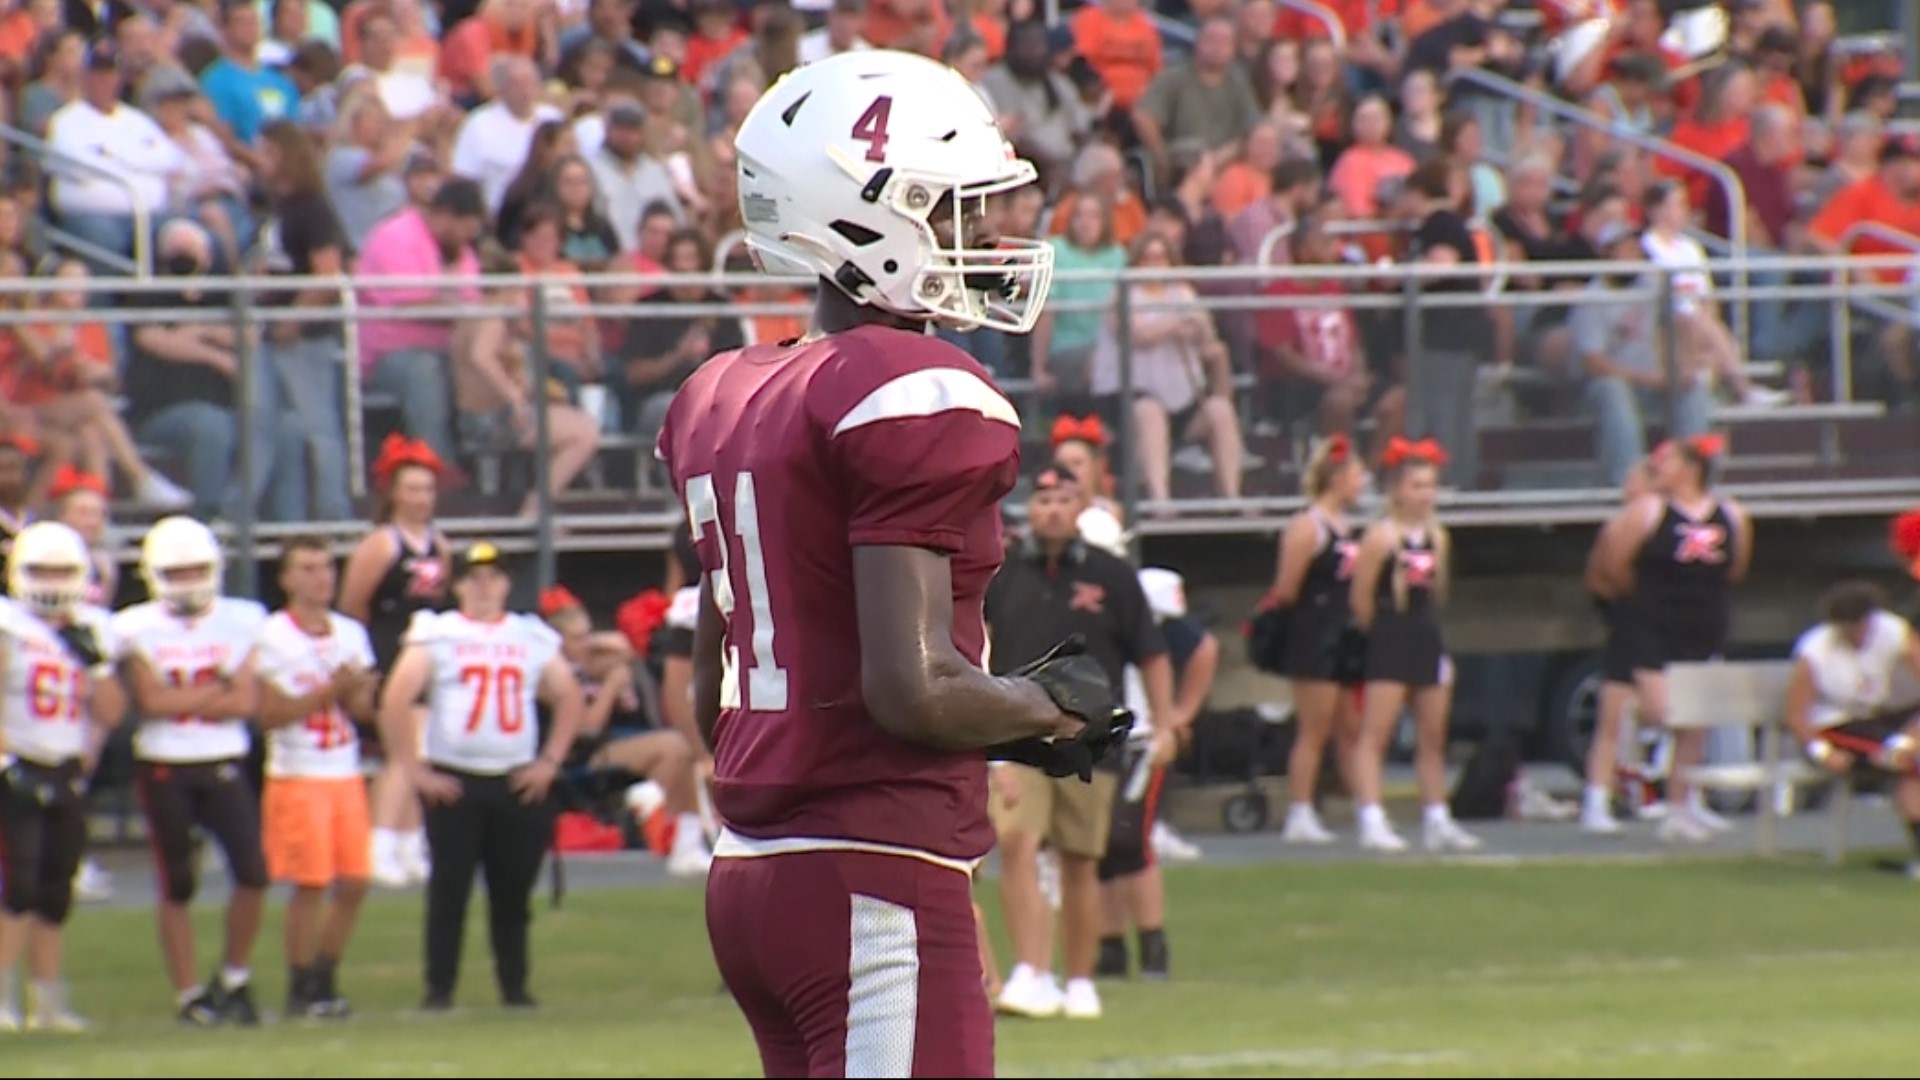 The Muldrow senior dominated on both sides of the ball in helping lead the Bulldogs to a win in the Battle of 64.